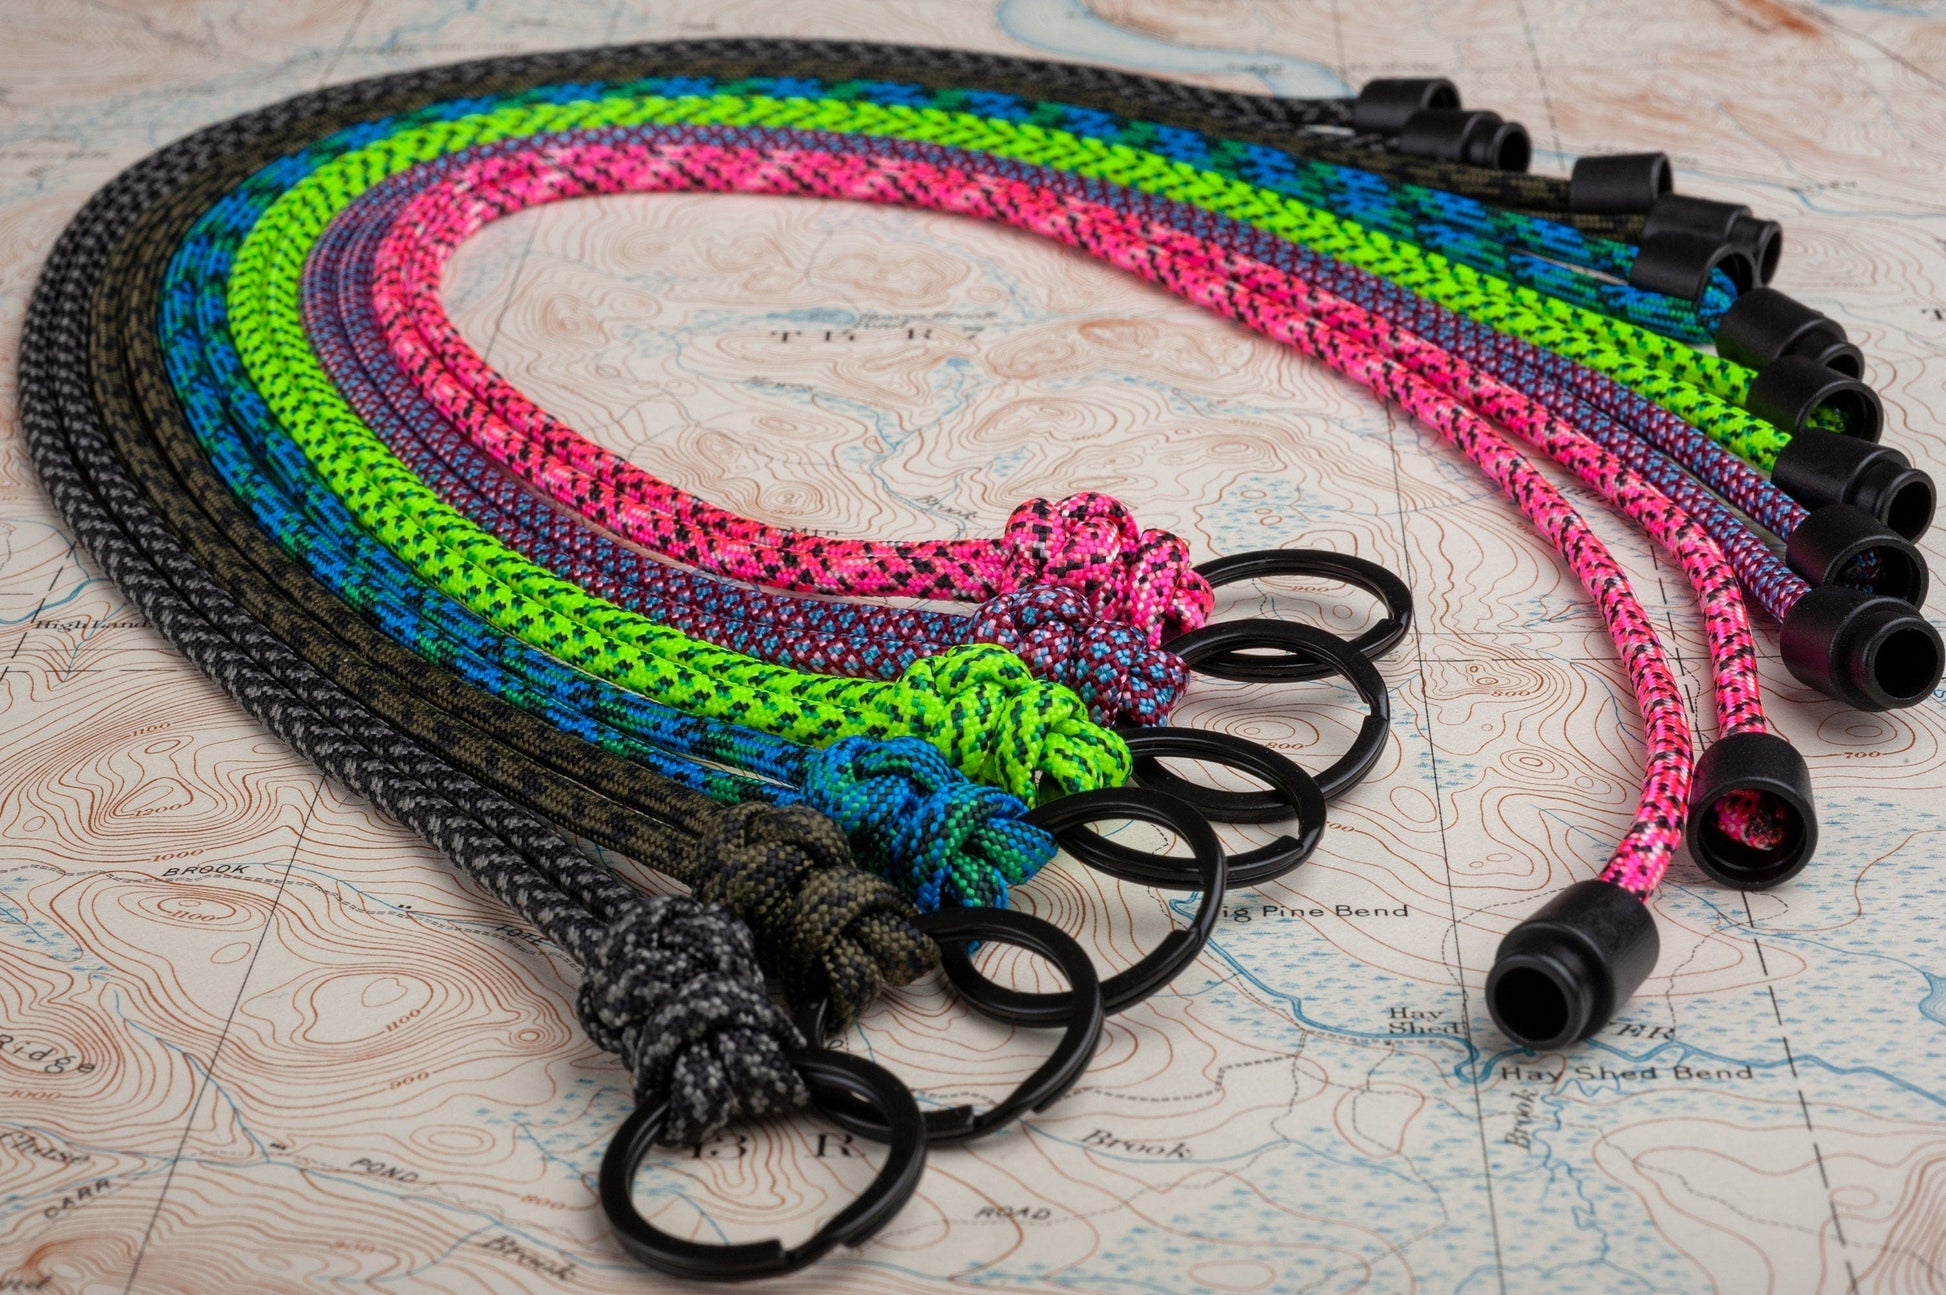 HK Hook Paracord Neck Lanyard with Breakaway Clasp and Your Choice of 5 Beads and 105 Cord Colors Gold